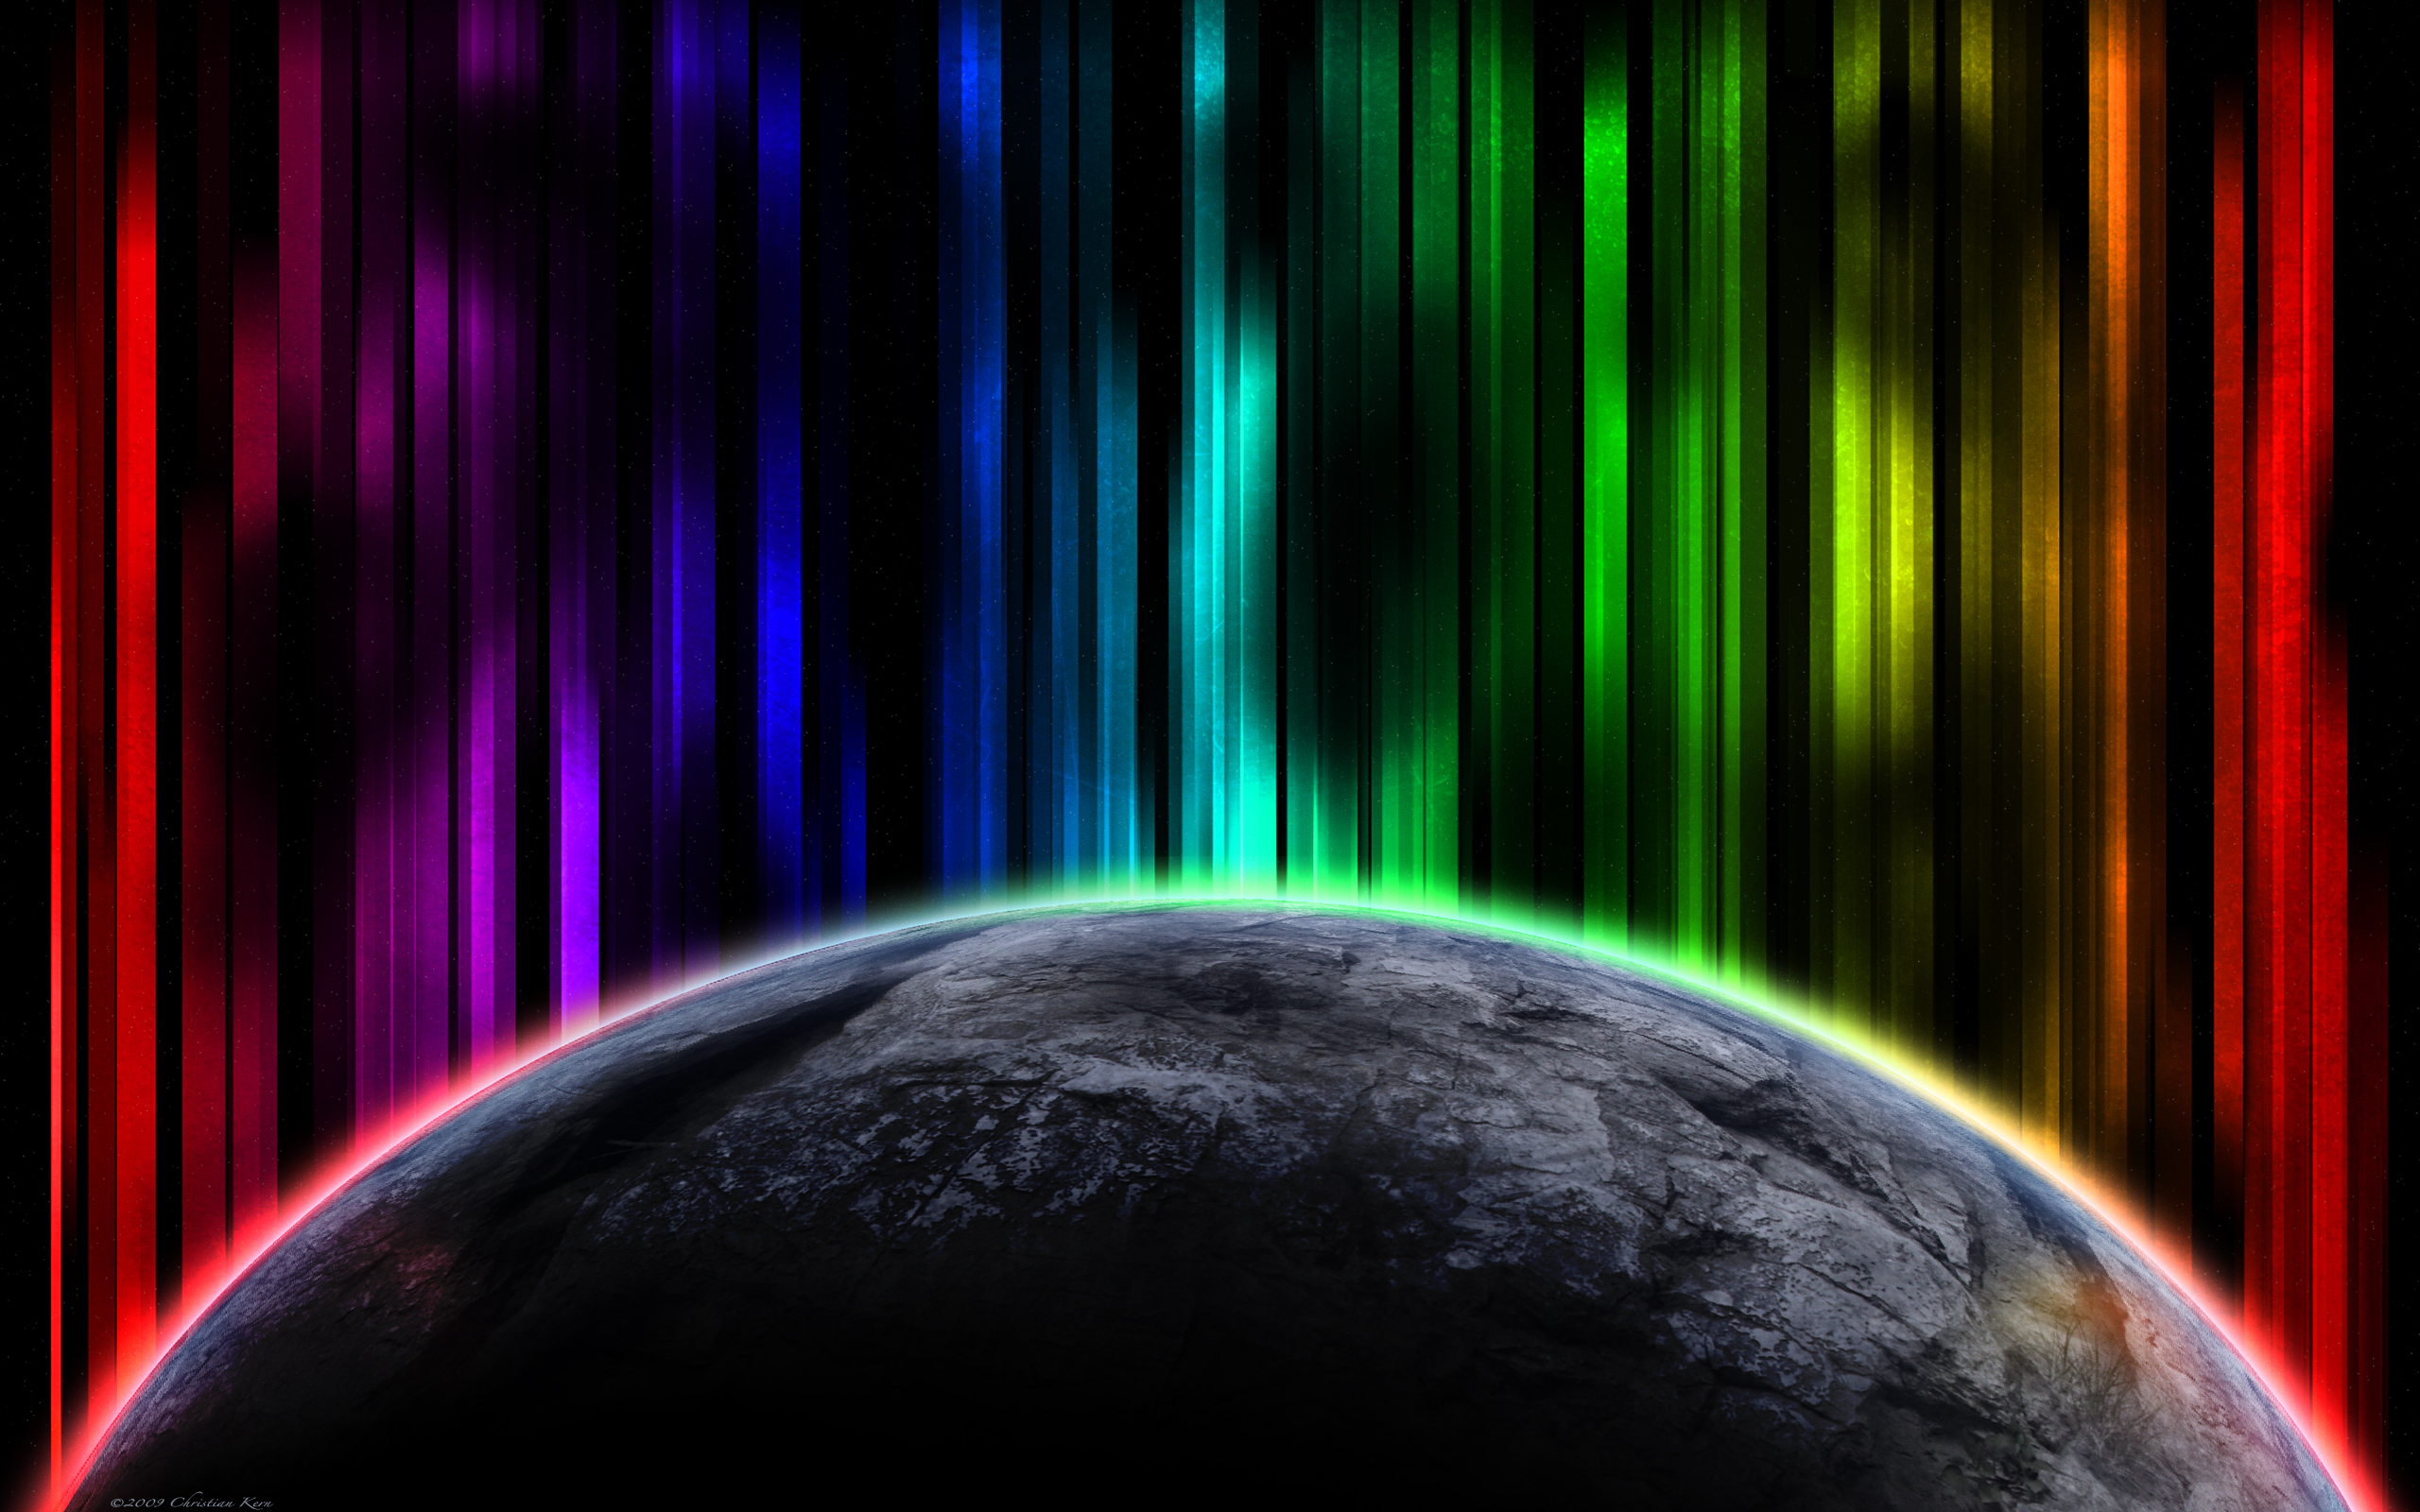 Spectrum of Colour - High Definition, High Resolution HD Wallpapers : High  Definition, High Resolution HD Wallpapers